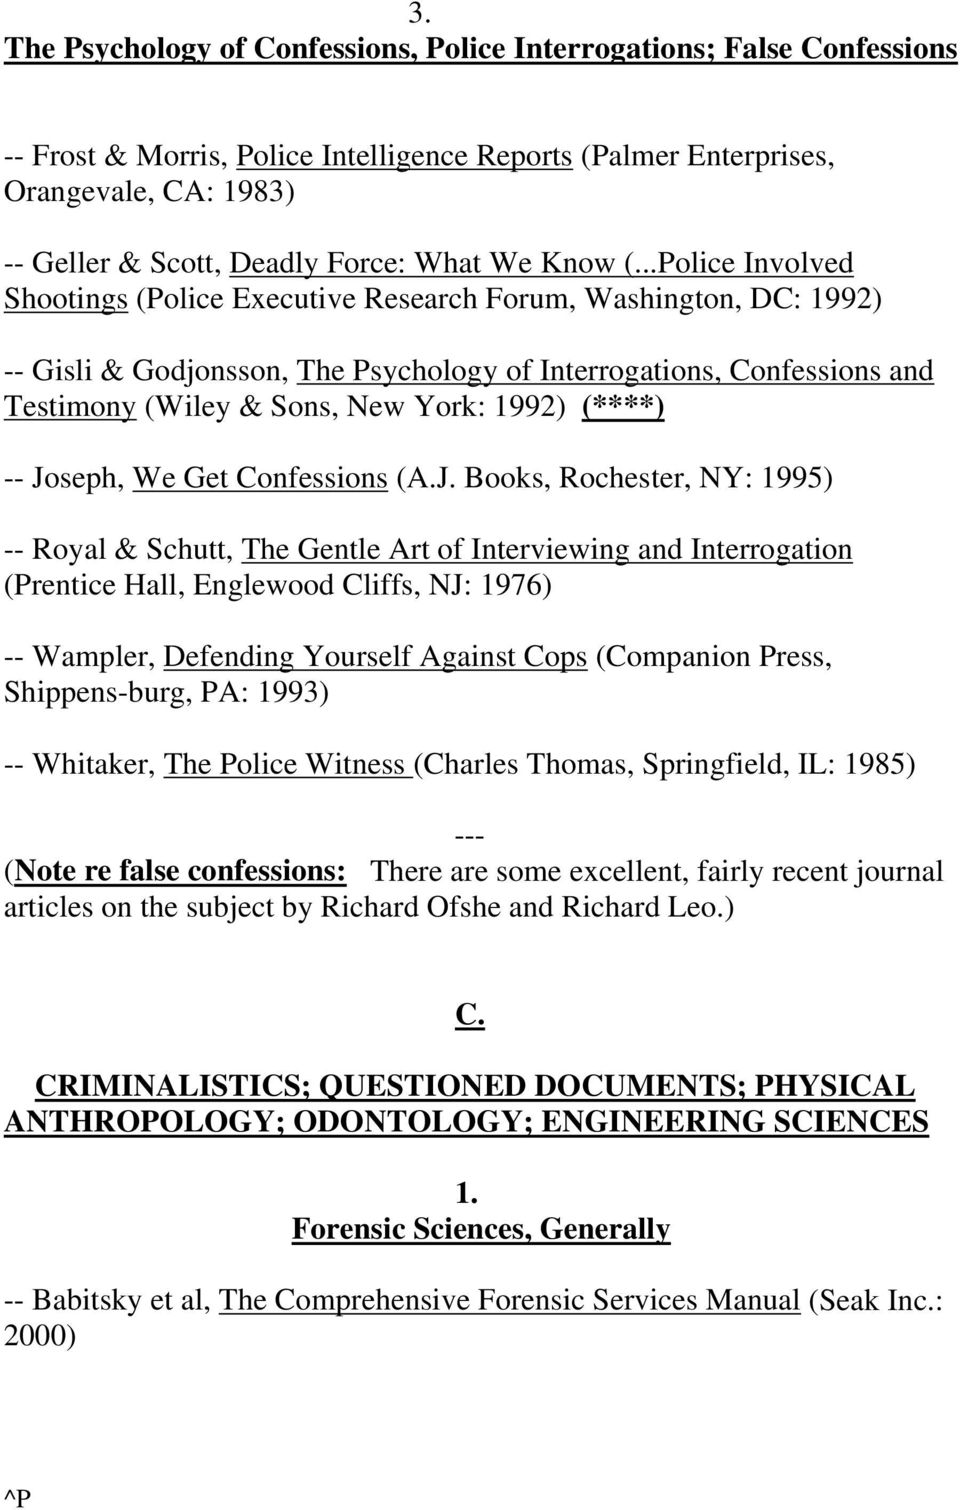 ..Police Involved Shootings (Police Executive Research Forum, Washington, DC: 1992) -- Gisli & Godjonsson, The Psychology of Interrogations, Confessions and Testimony (Wiley & Sons, New York: 1992)